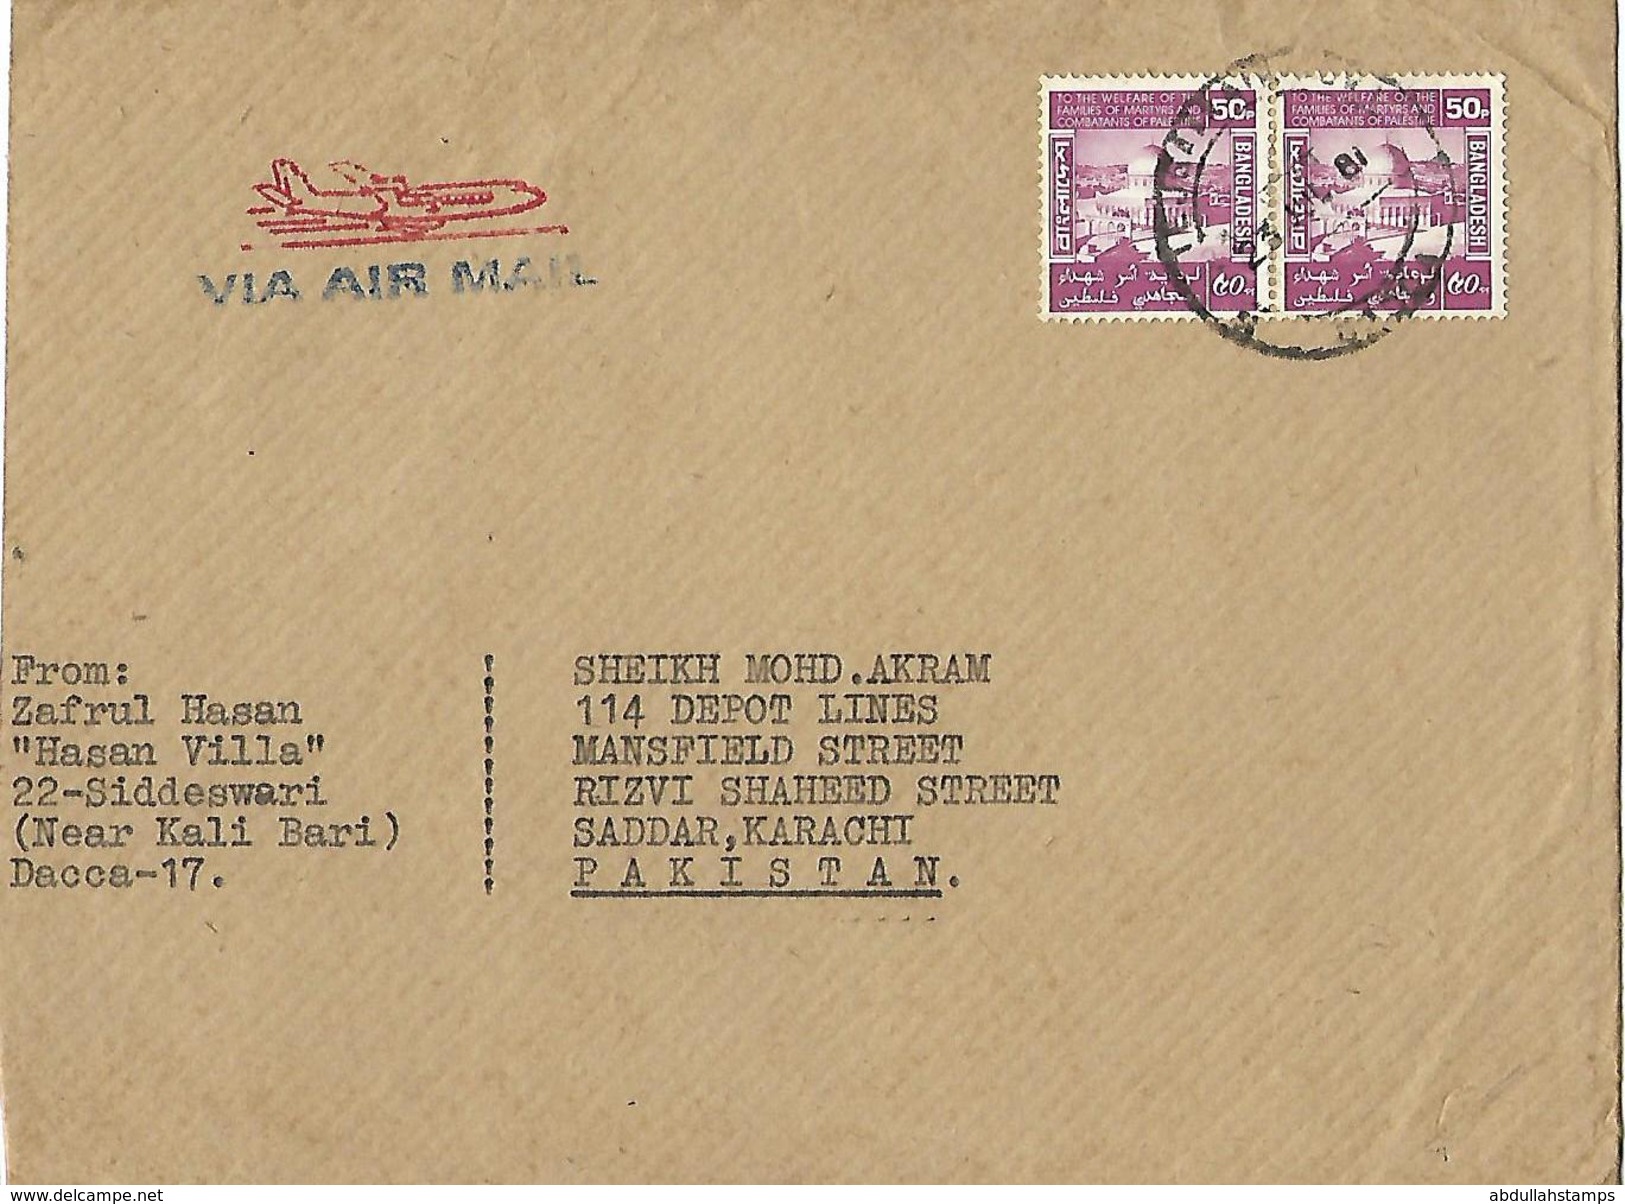 BANGLADESH 1981 AIRMAIL COVER TO PAKISTAN WITH DOME OF THE ROCK , MOSQUE STAMP - Bangladesh